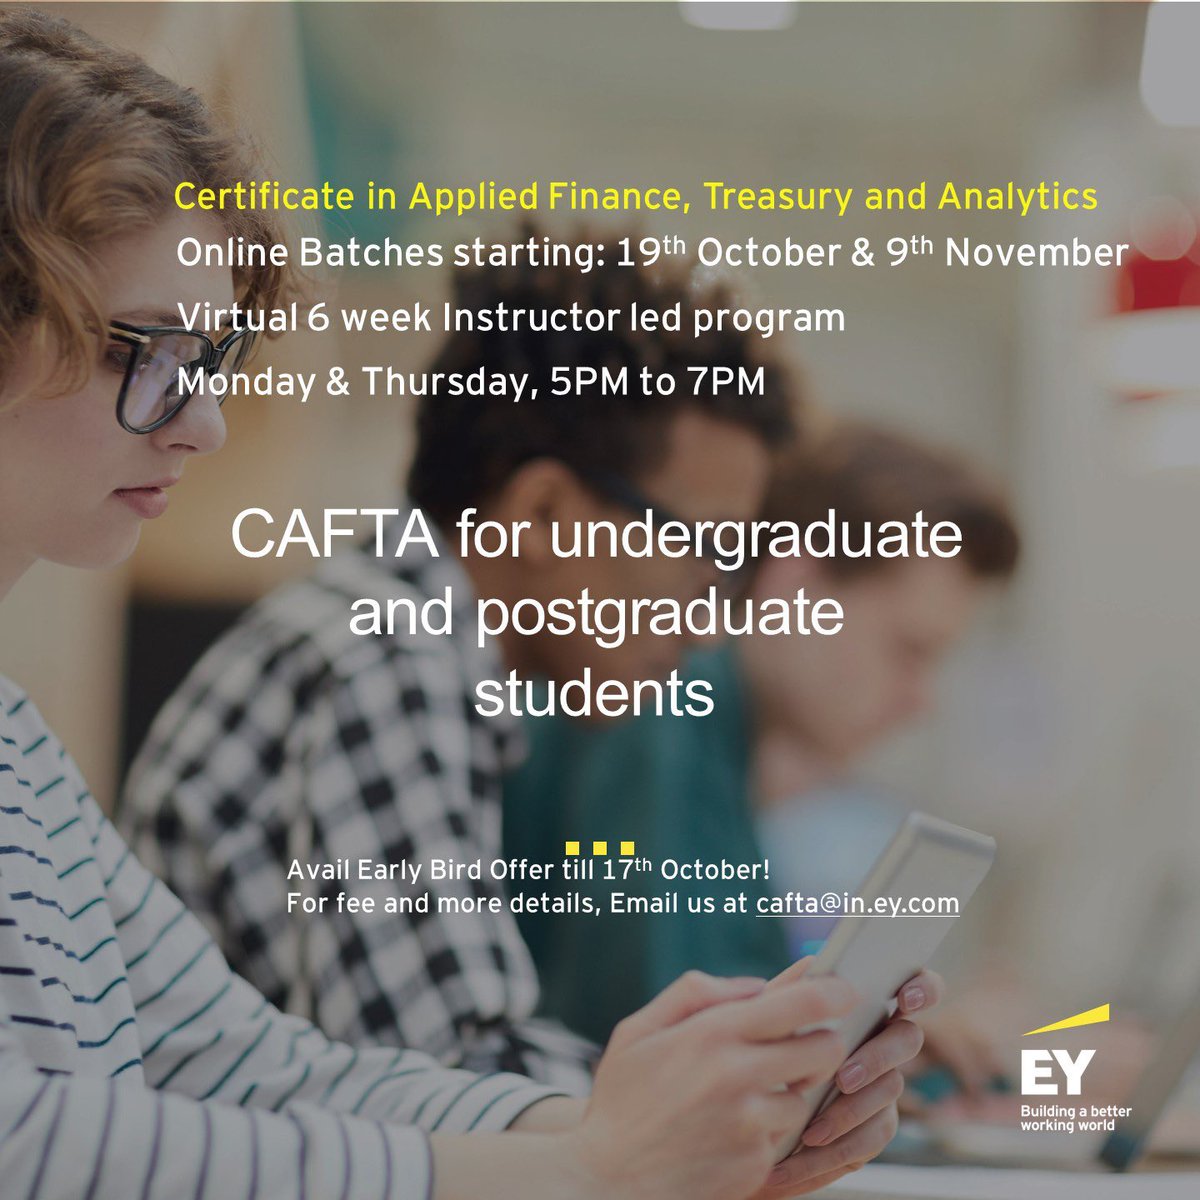 Learning must never cease!' 
With that thought in our core, EY CAFTA continues the journey of upskilling students in the field of finance and treasury with its flagship program – CAFTA Virtual Scholar’s Batch.
#EYCAFTA financialriskmanagement #upskill #certificationcourse